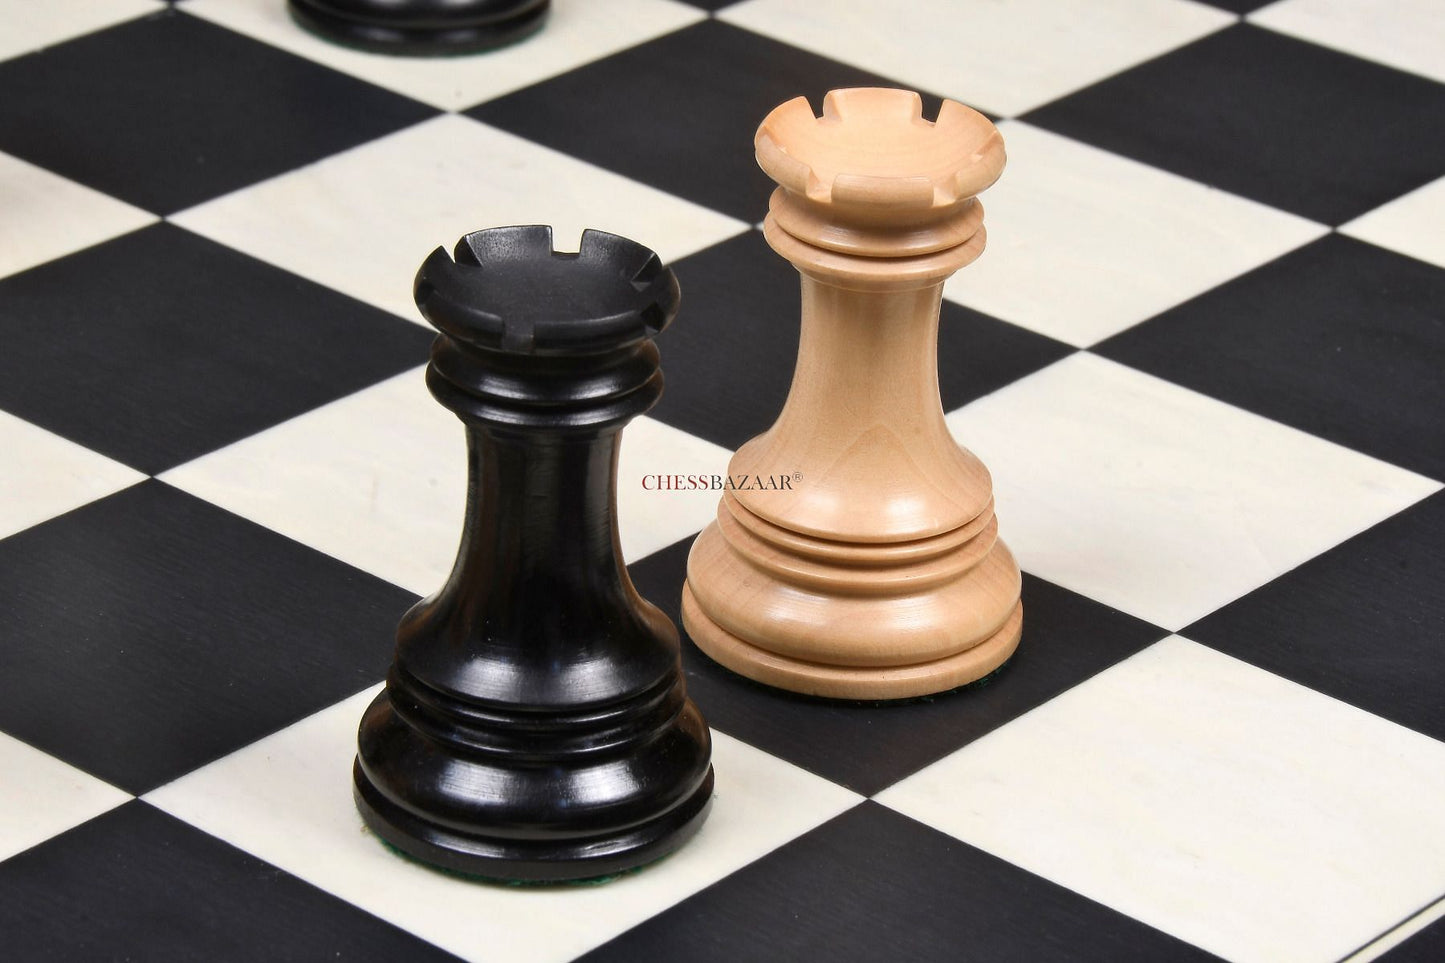 New Indian-American Luxury Series Weighted Chess Pieces in Genuine Ebony Wood & Indian Box Wood V2.0 - 4.4" King